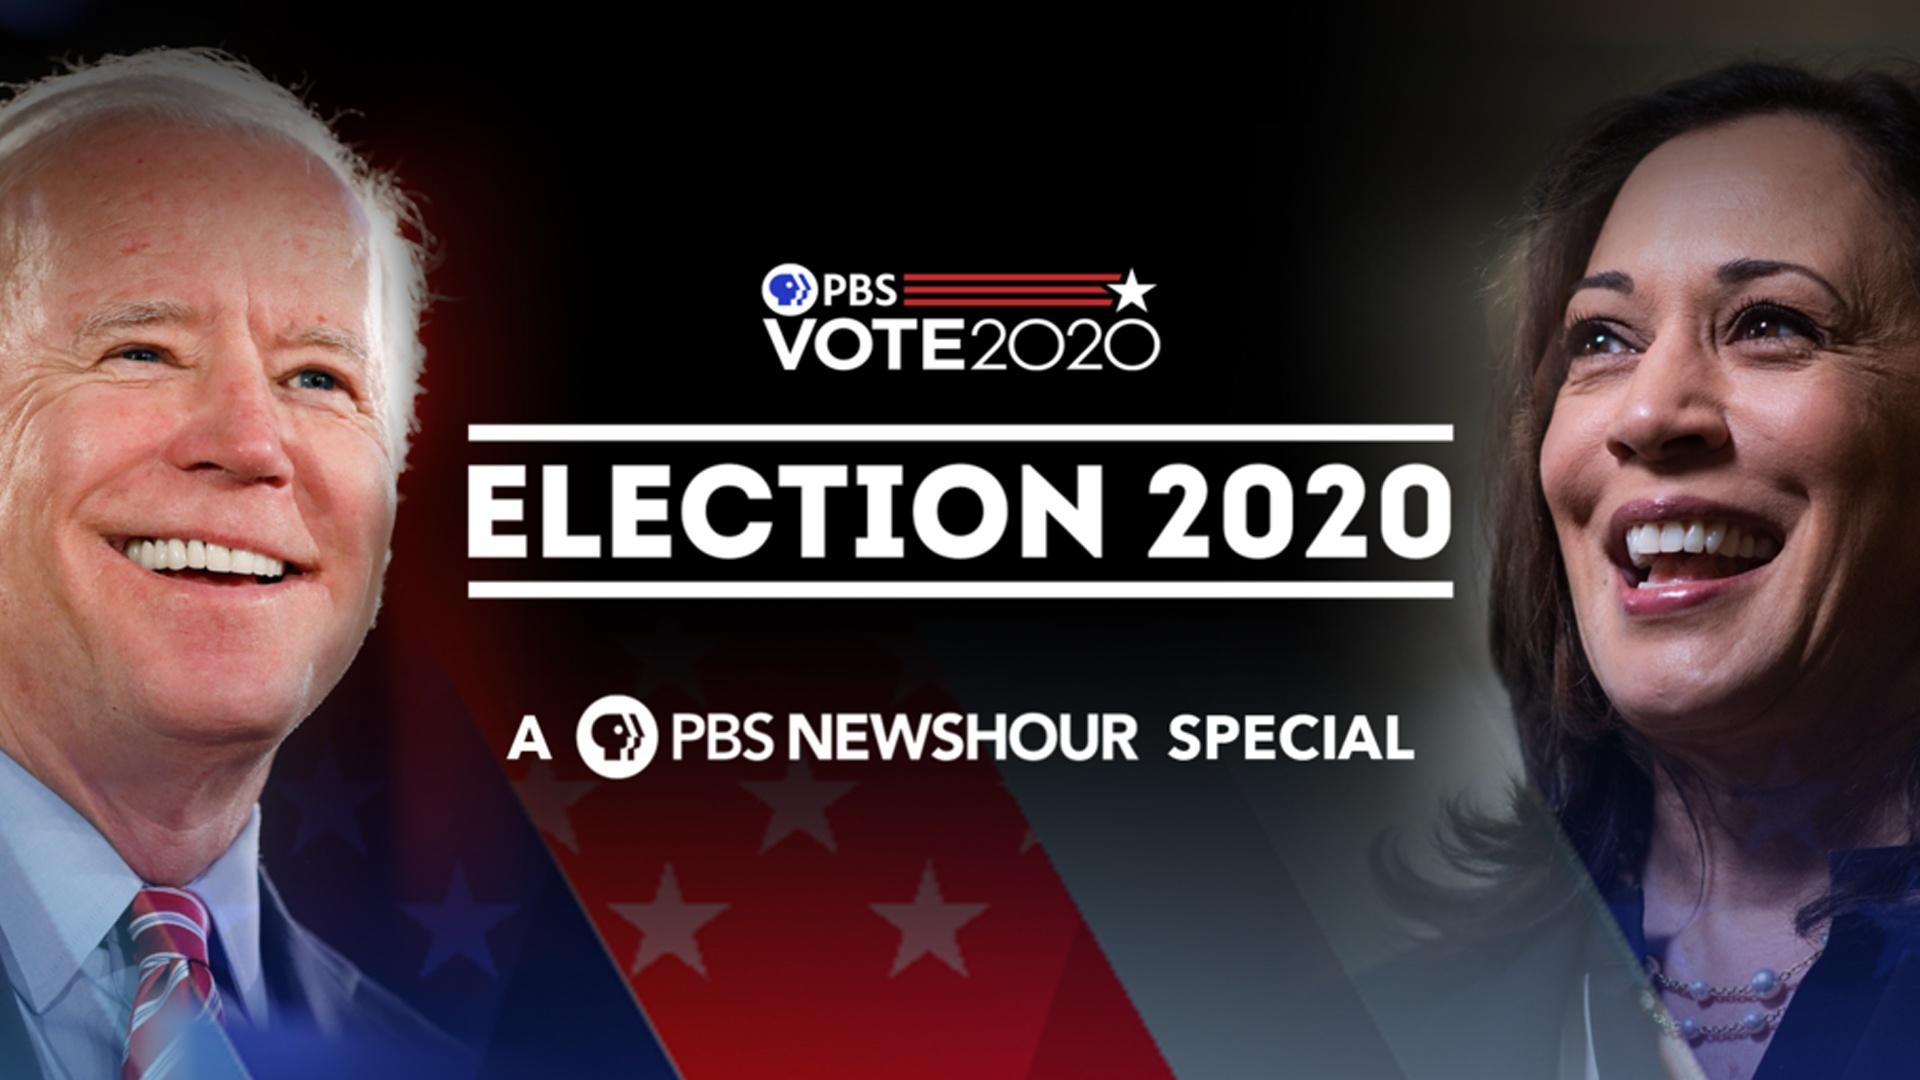 PBS NewsHour 2020 Election Update Special